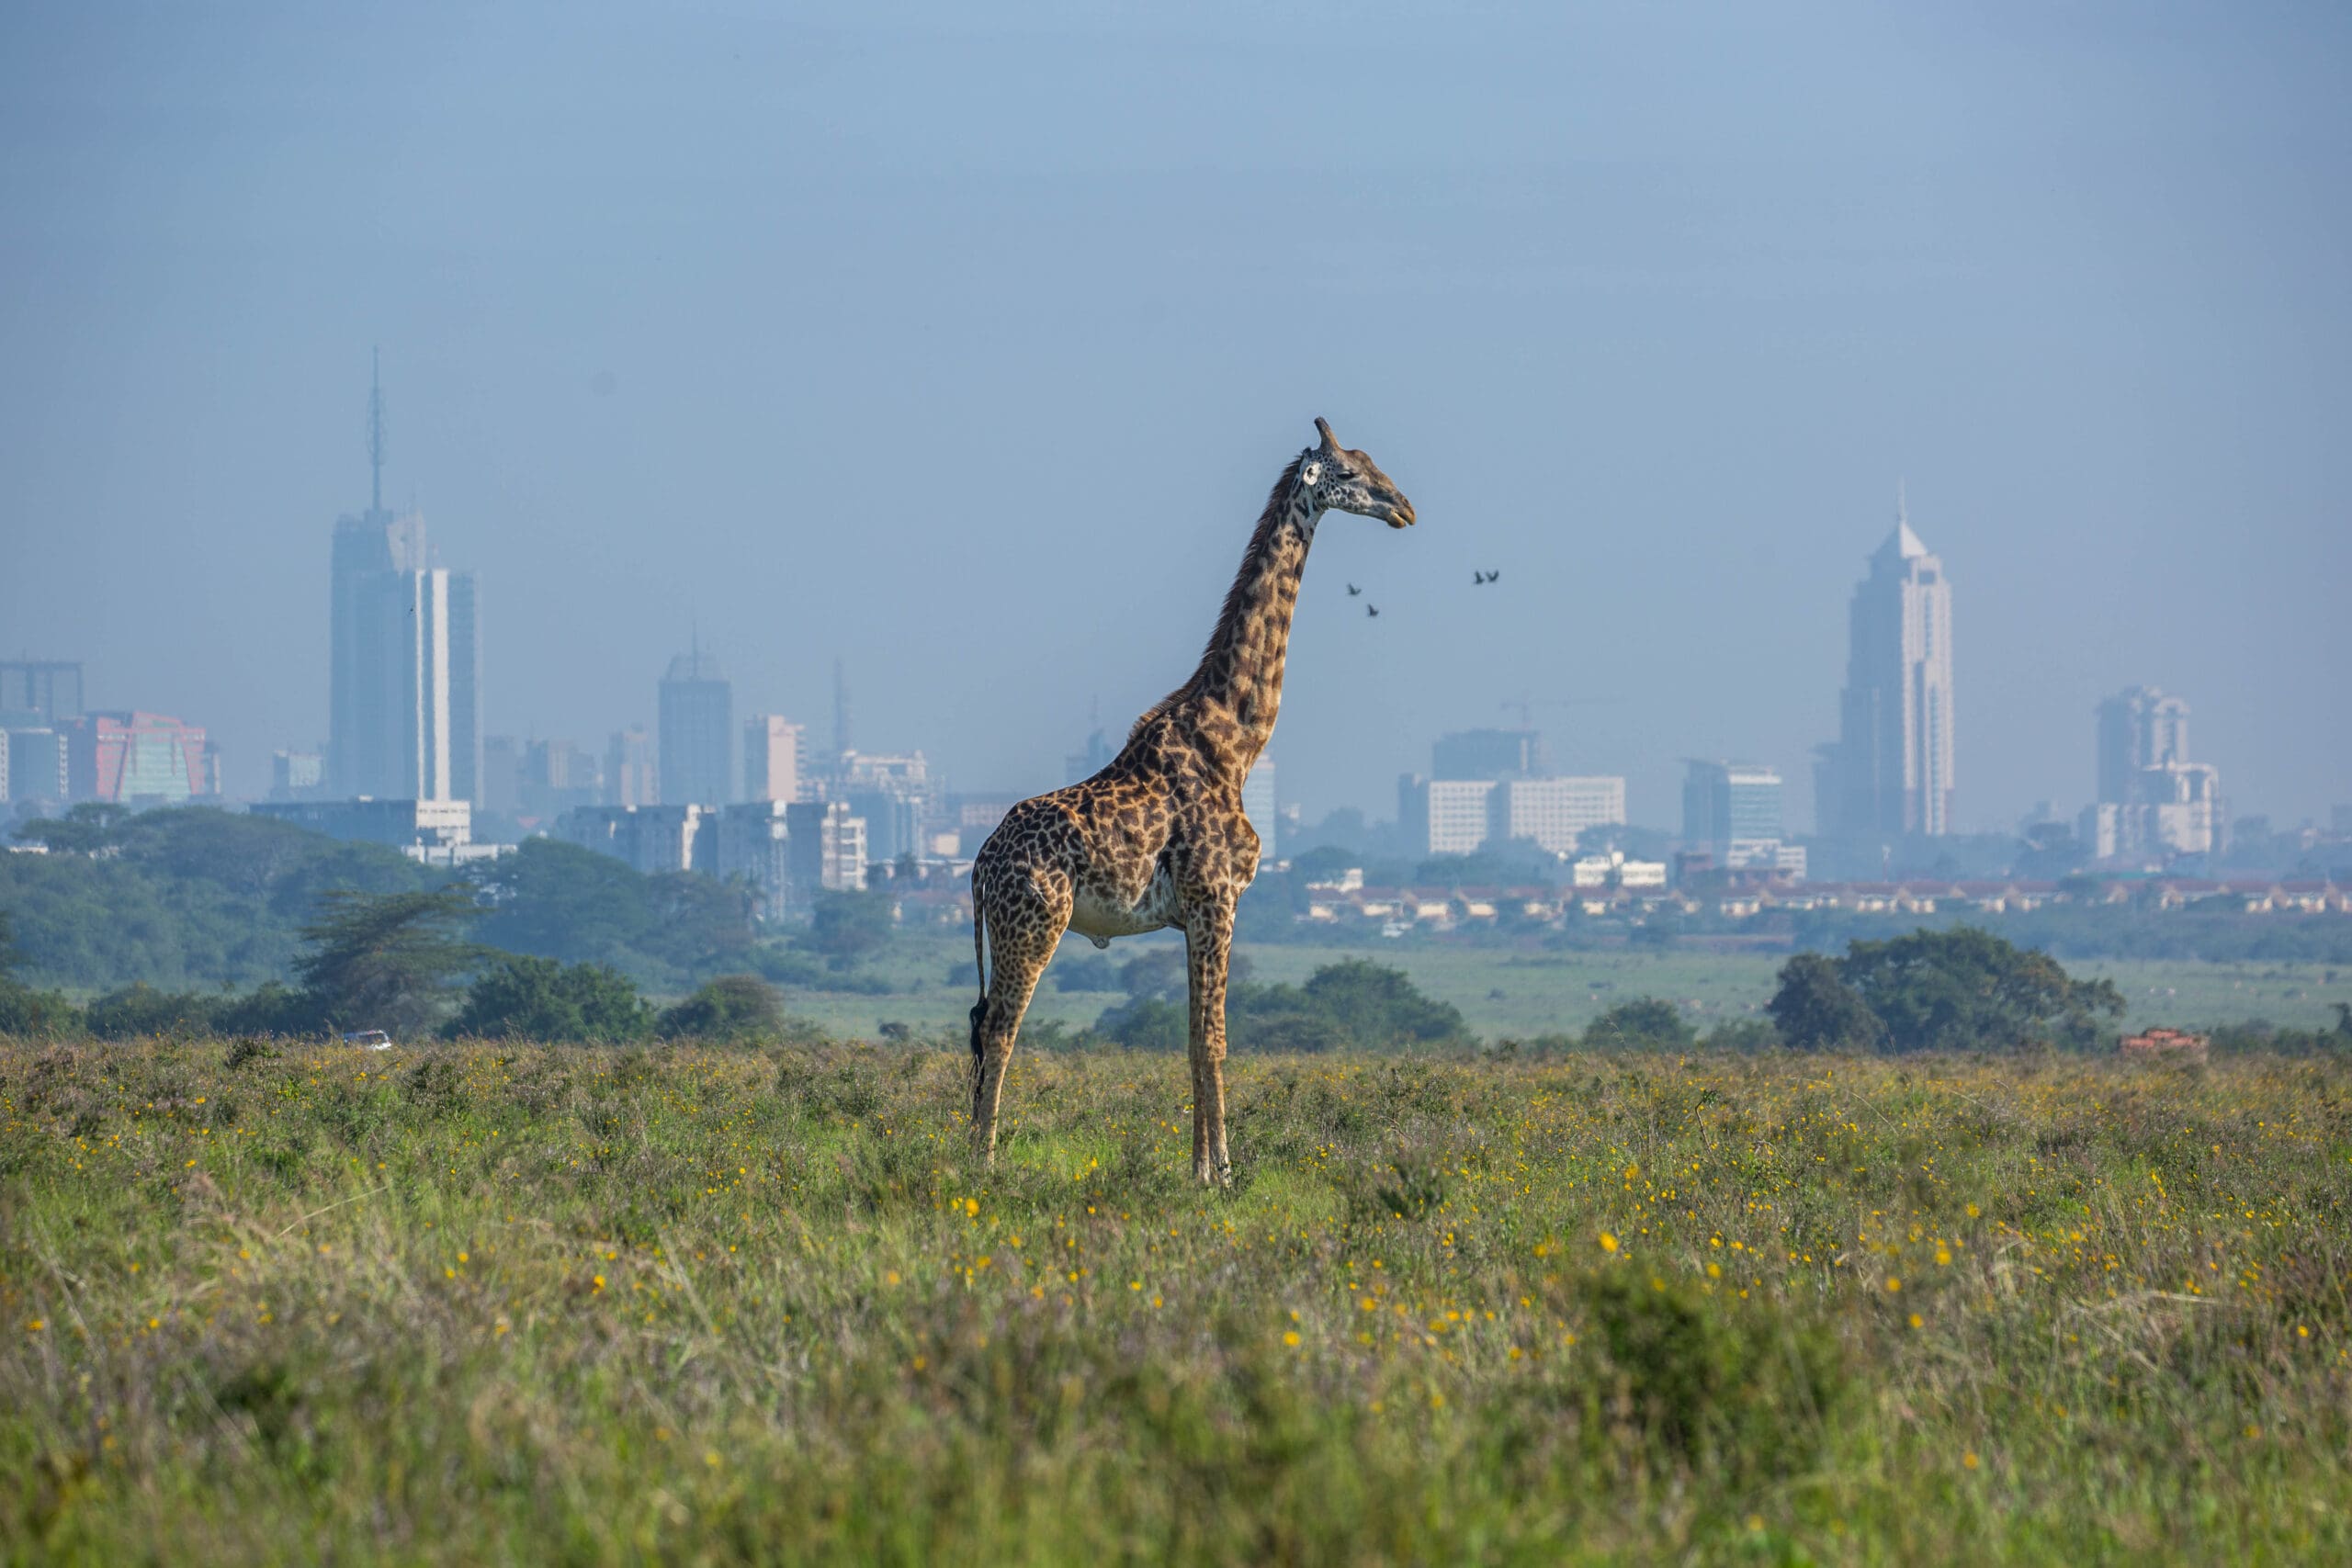 20 must-see places for kids in Nairobi - Malaica